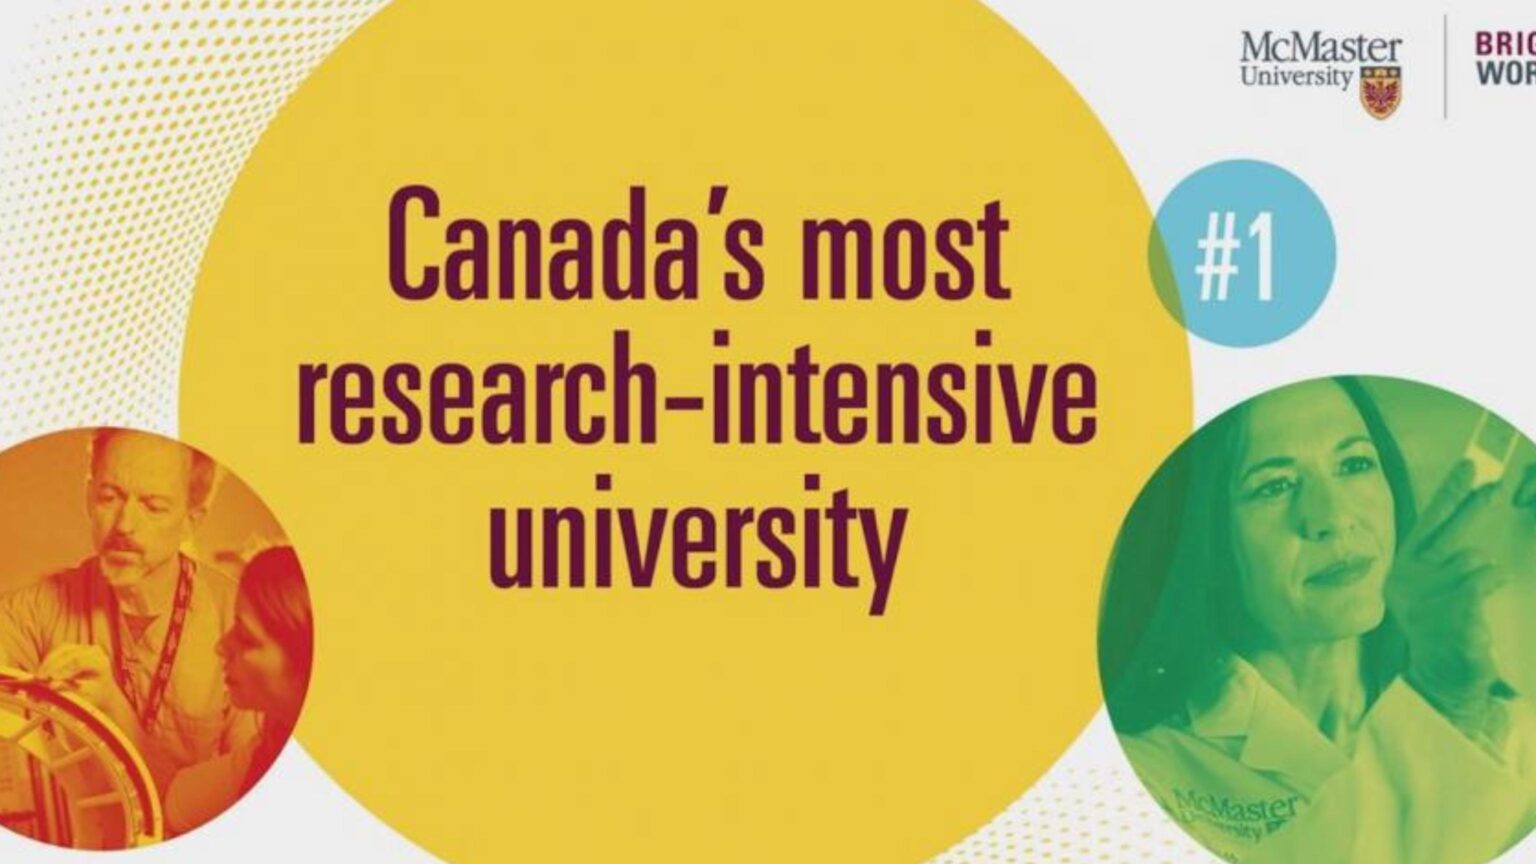 Canada's most research-intensive university